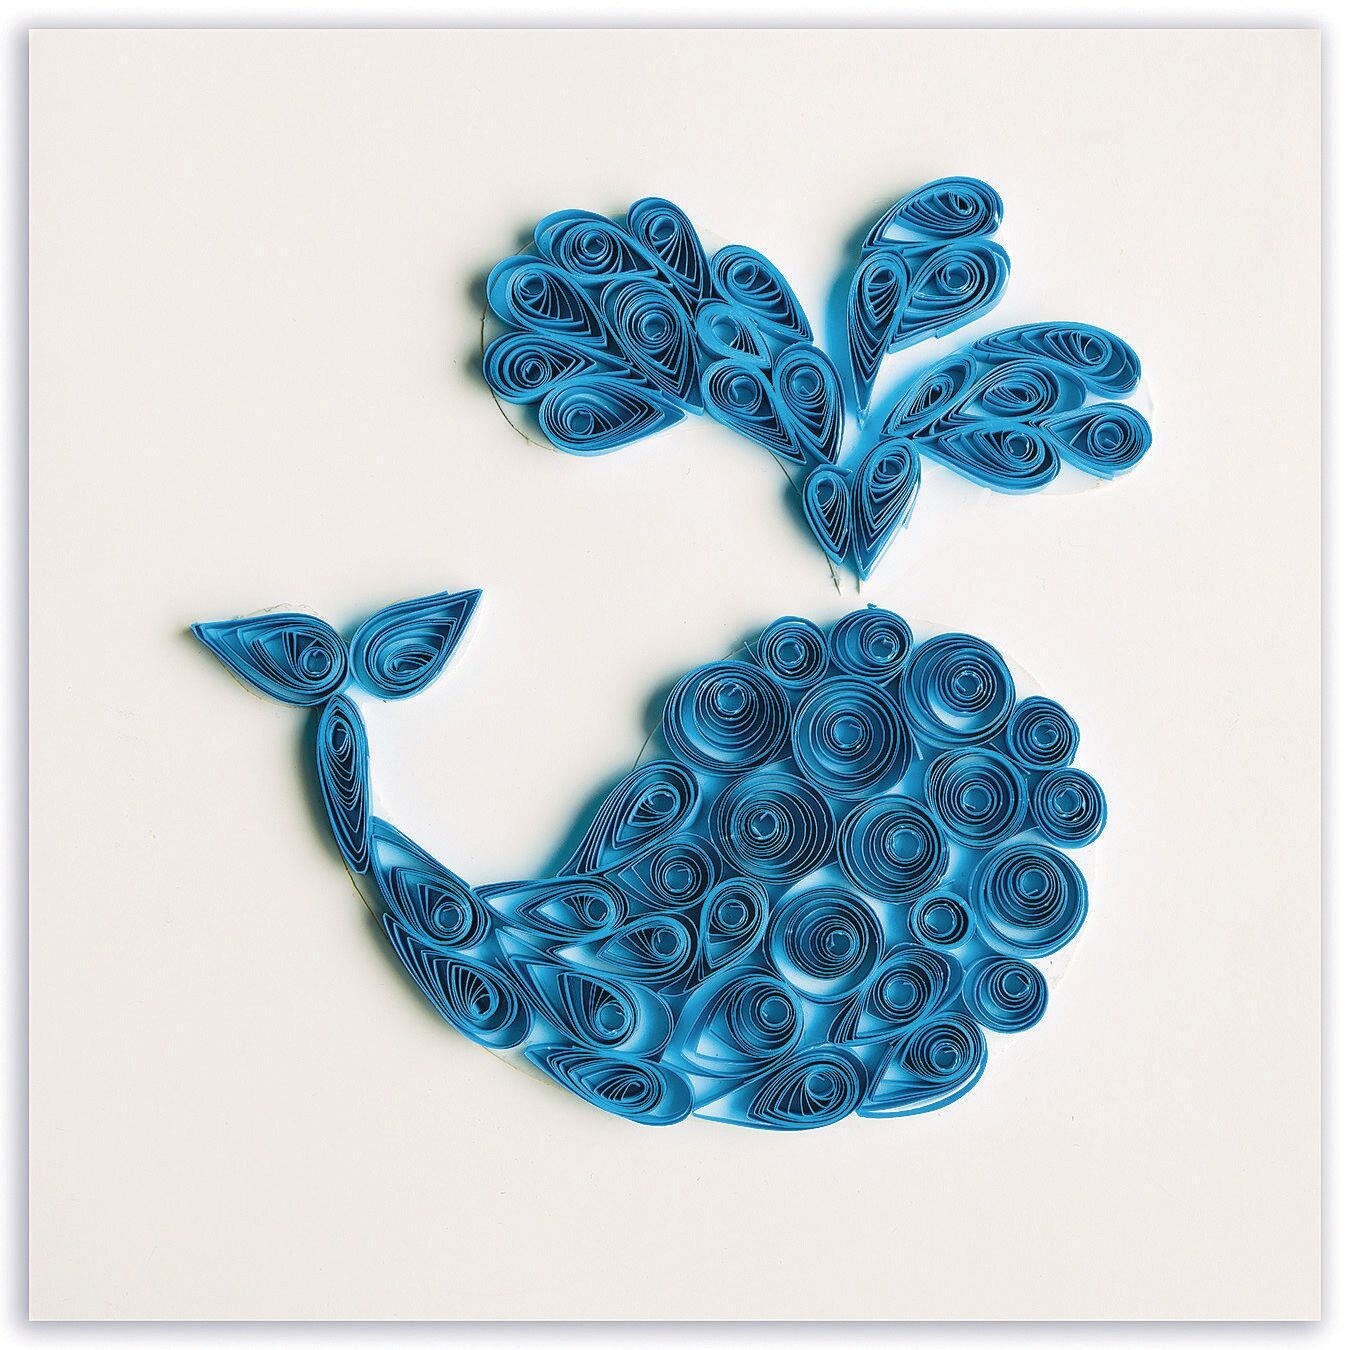 What Glue Is Best For Paper Quilling? – Crafting With Children